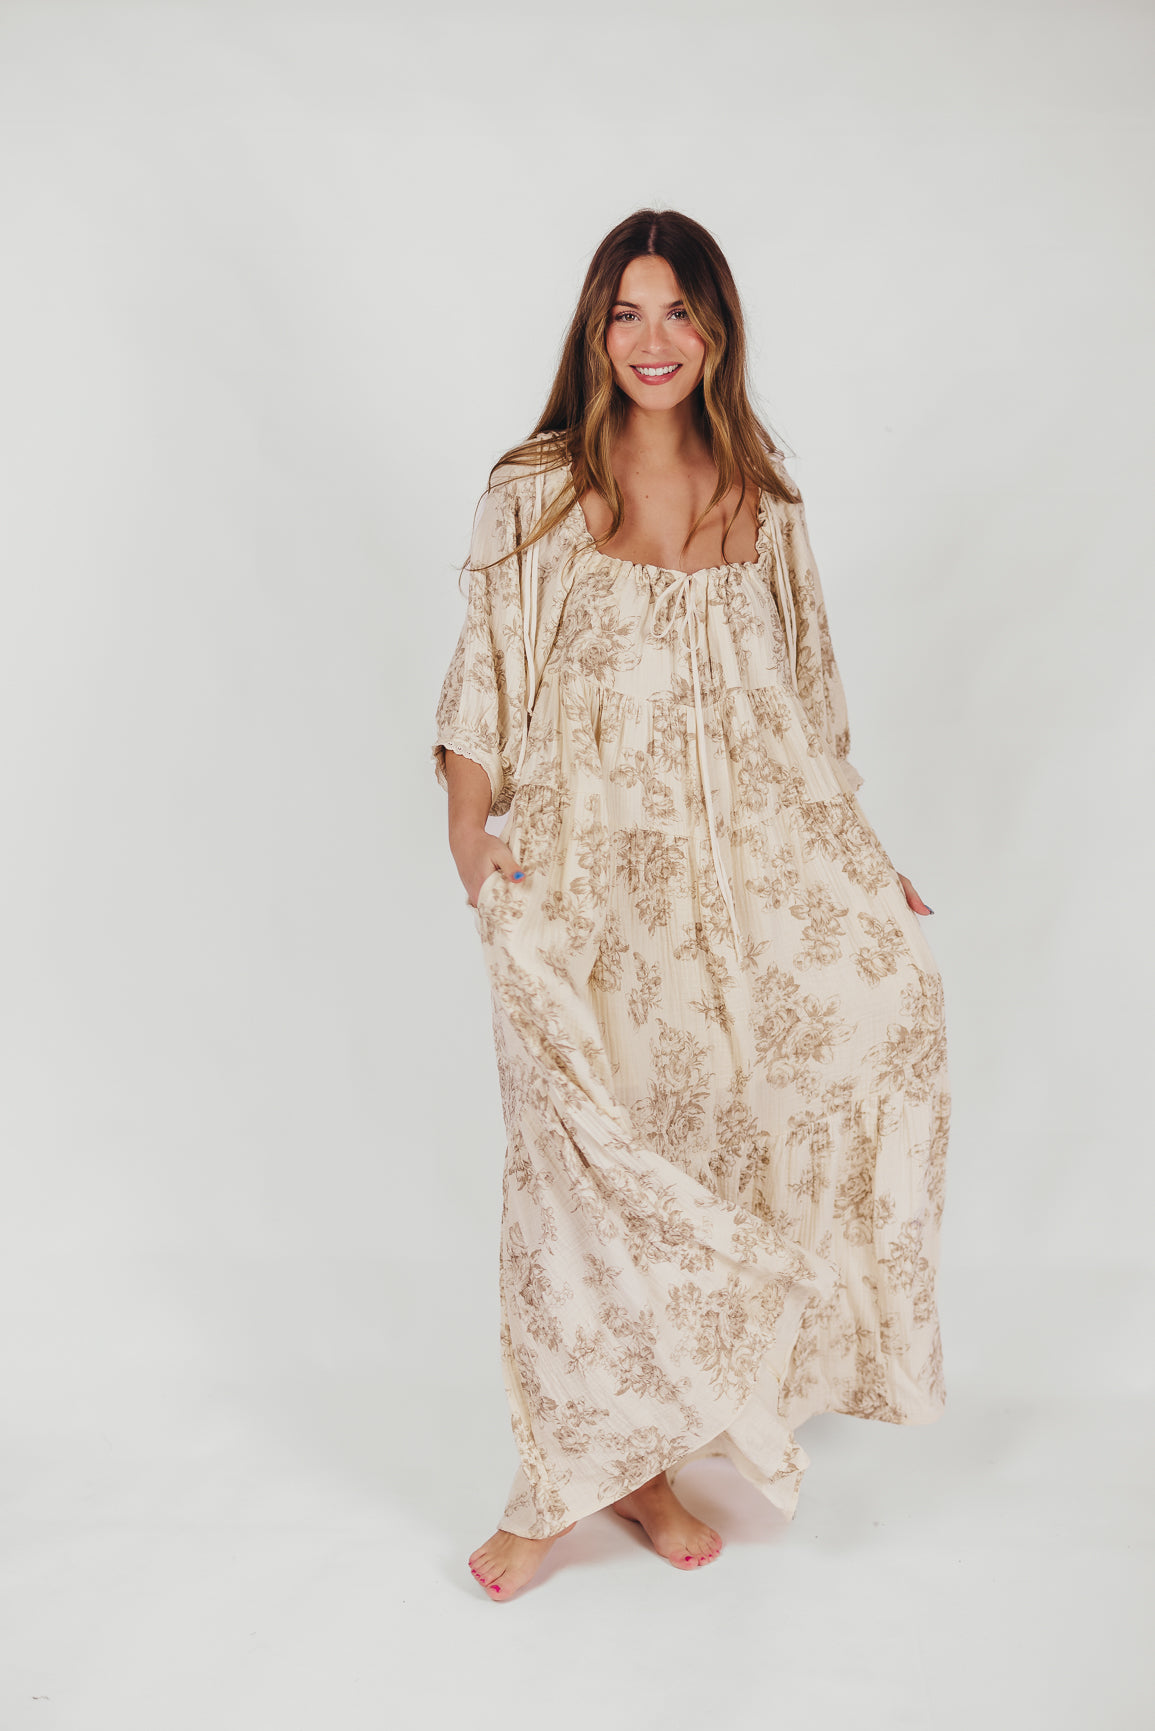 Cara 100% Cotton Maxi Dress in Brown Floral (Low Stock)